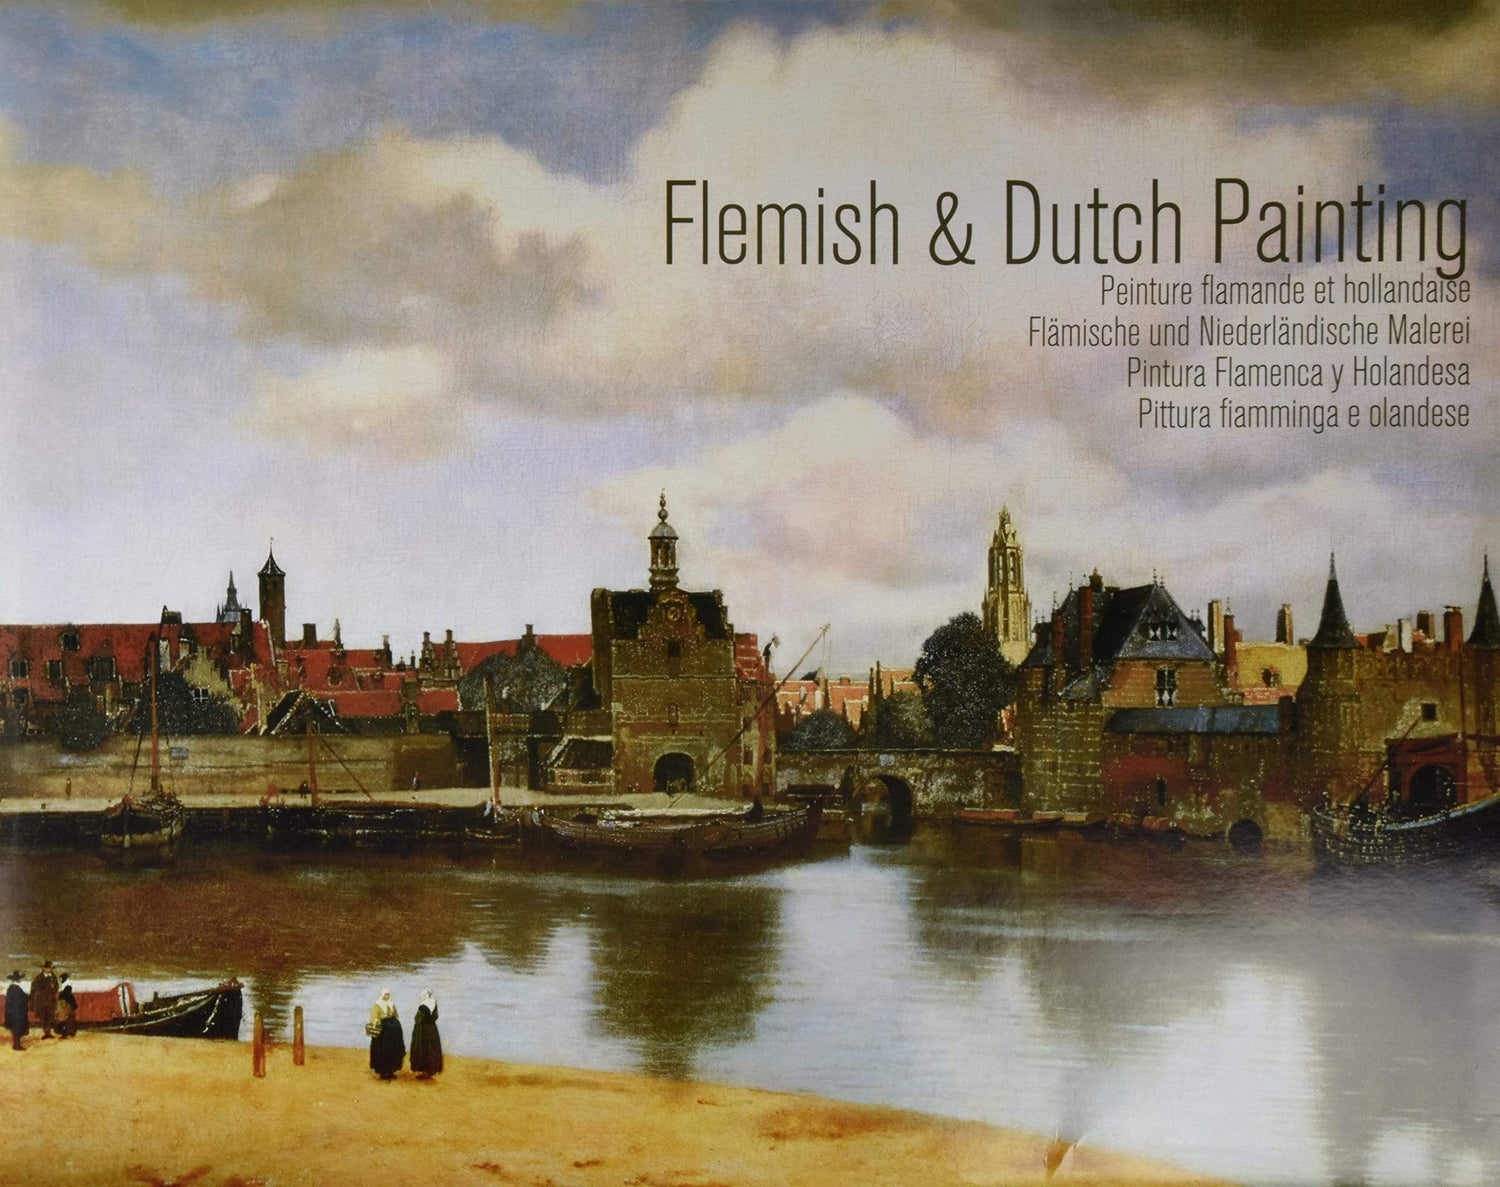 POSTERS: FLEMISH & DUTCH PAINTING (THE POSTER COLLECTION)